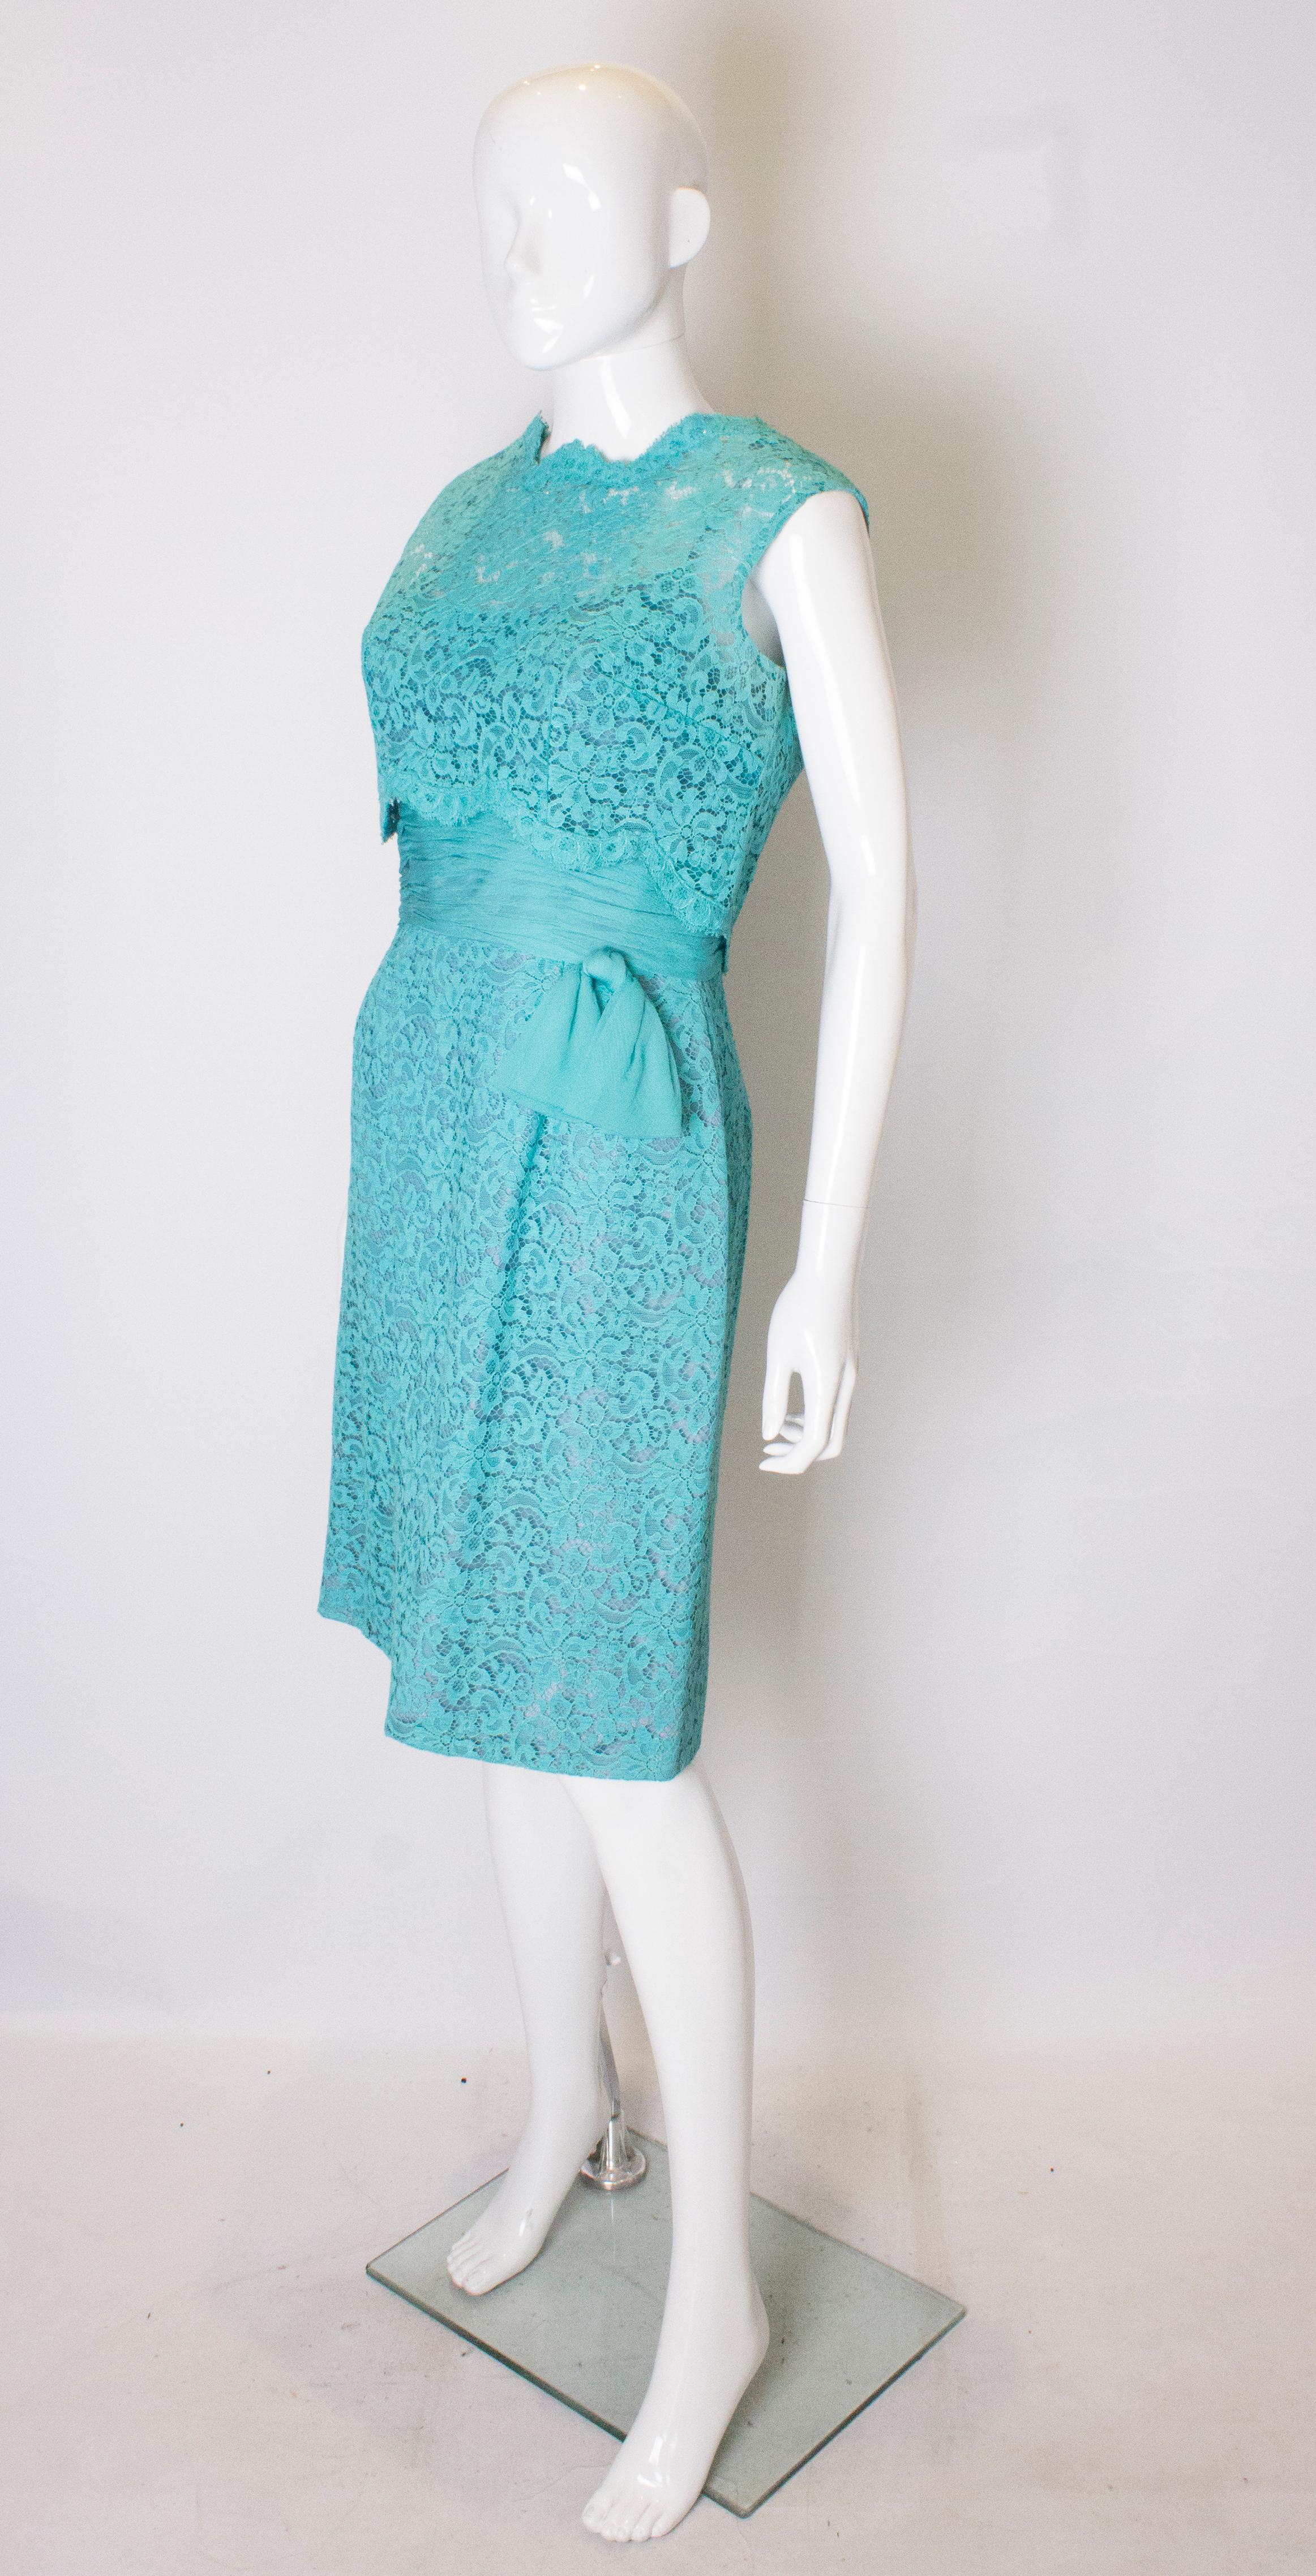 A chic vintage cocktail dress in turquoise lace. The underdress has spagetti straps, a chiffon waist , lace skirt and a central back zip. The lace top has a scalloped back with popper fastenings. The dress has a 4 '' hem.